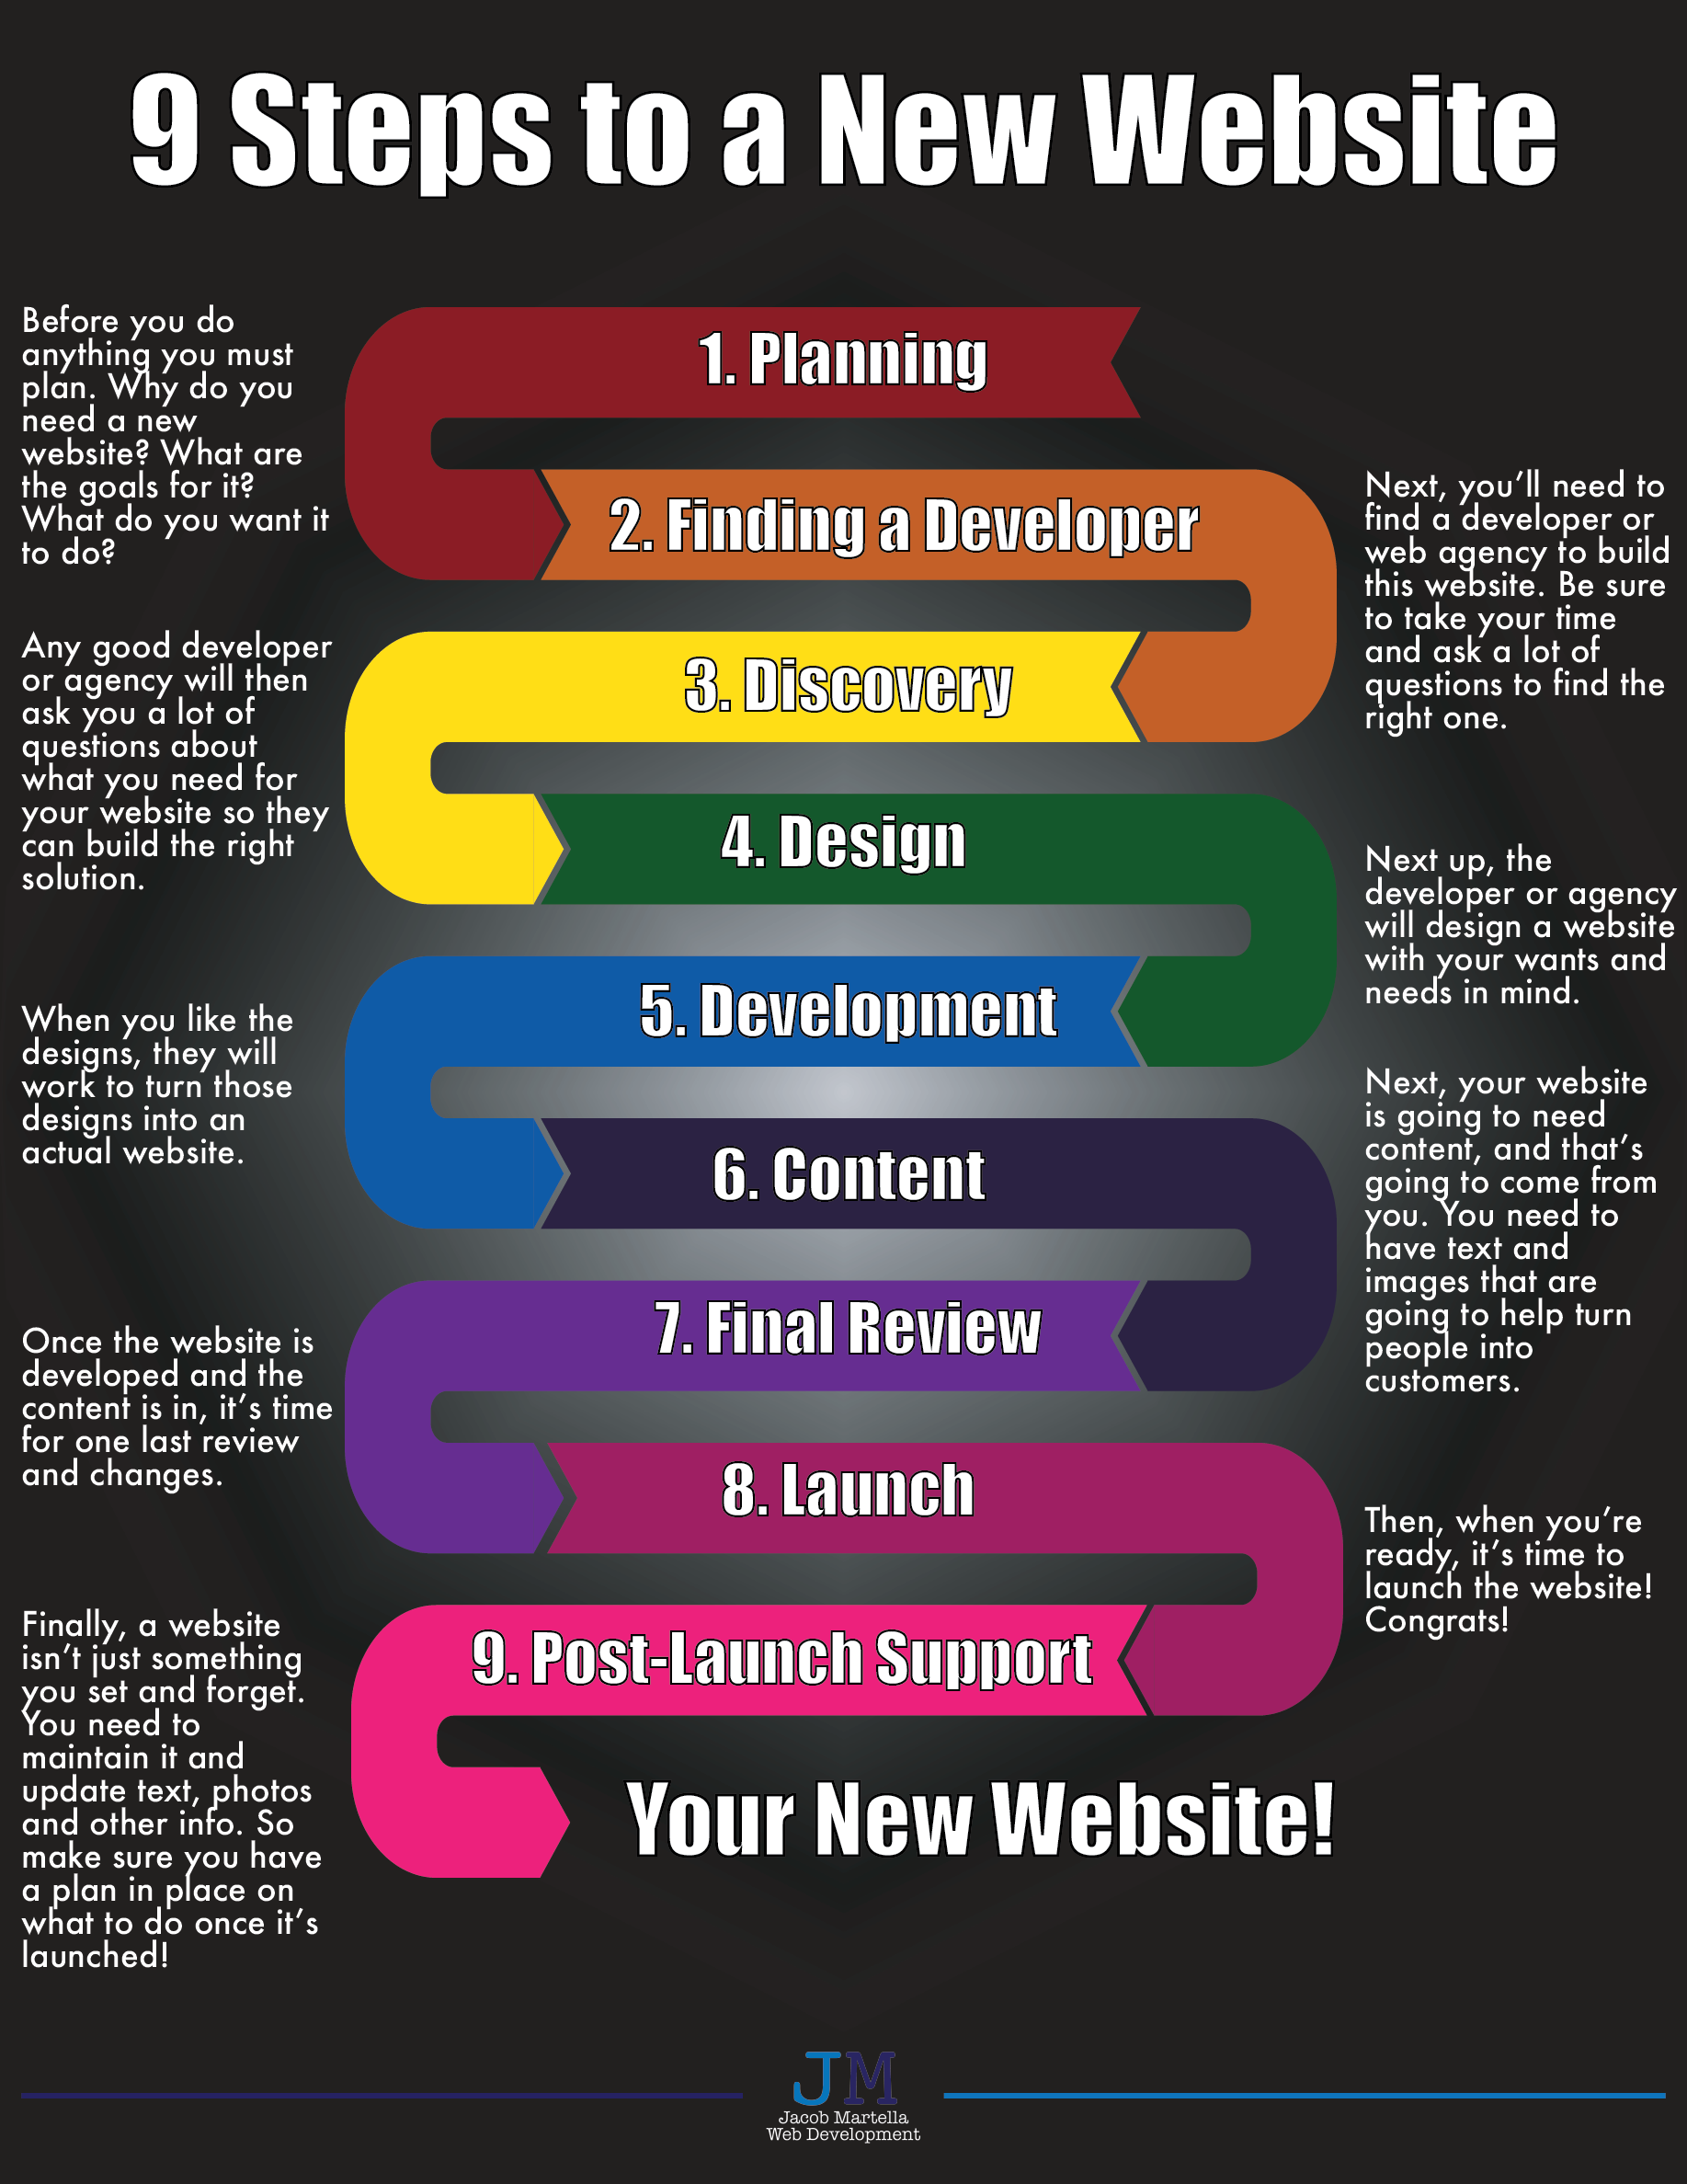 9 Steps to Create a New Website